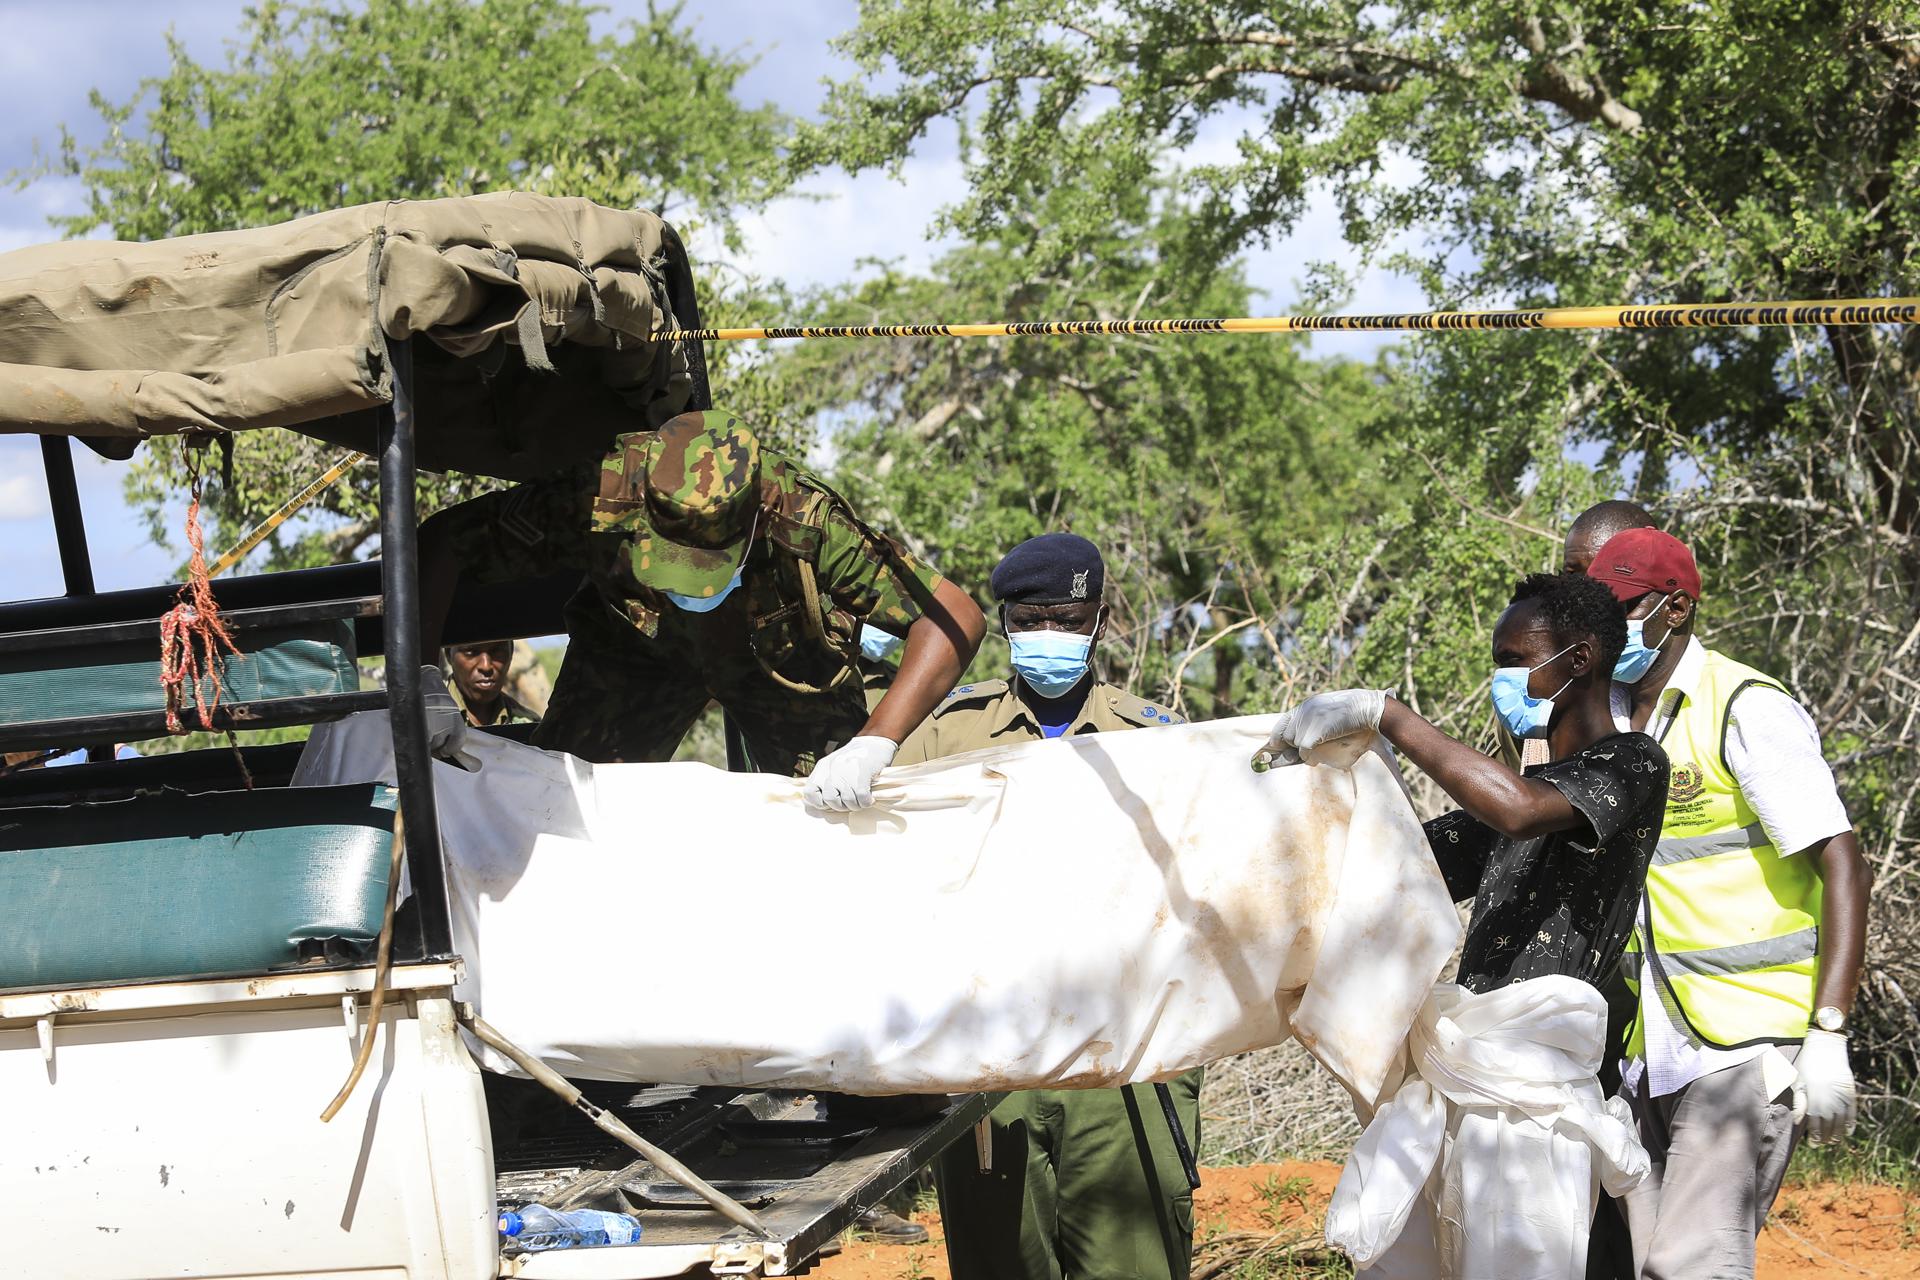 Kenyan homicide detectives and forensic experts from the Directorate of Criminal Investigations (DCI), examine exhumed bodies from several shallow mass graves of suspected members of a Christian cult after starving themselves to death, after allegedly being told by their controversial preacher Paul Mackenzie that they would go to heaven if they starved themselves to death, in the coastal Shakahola forest, in Kilifi, Kenya, 23 April 2023. EFE/EPA/STR